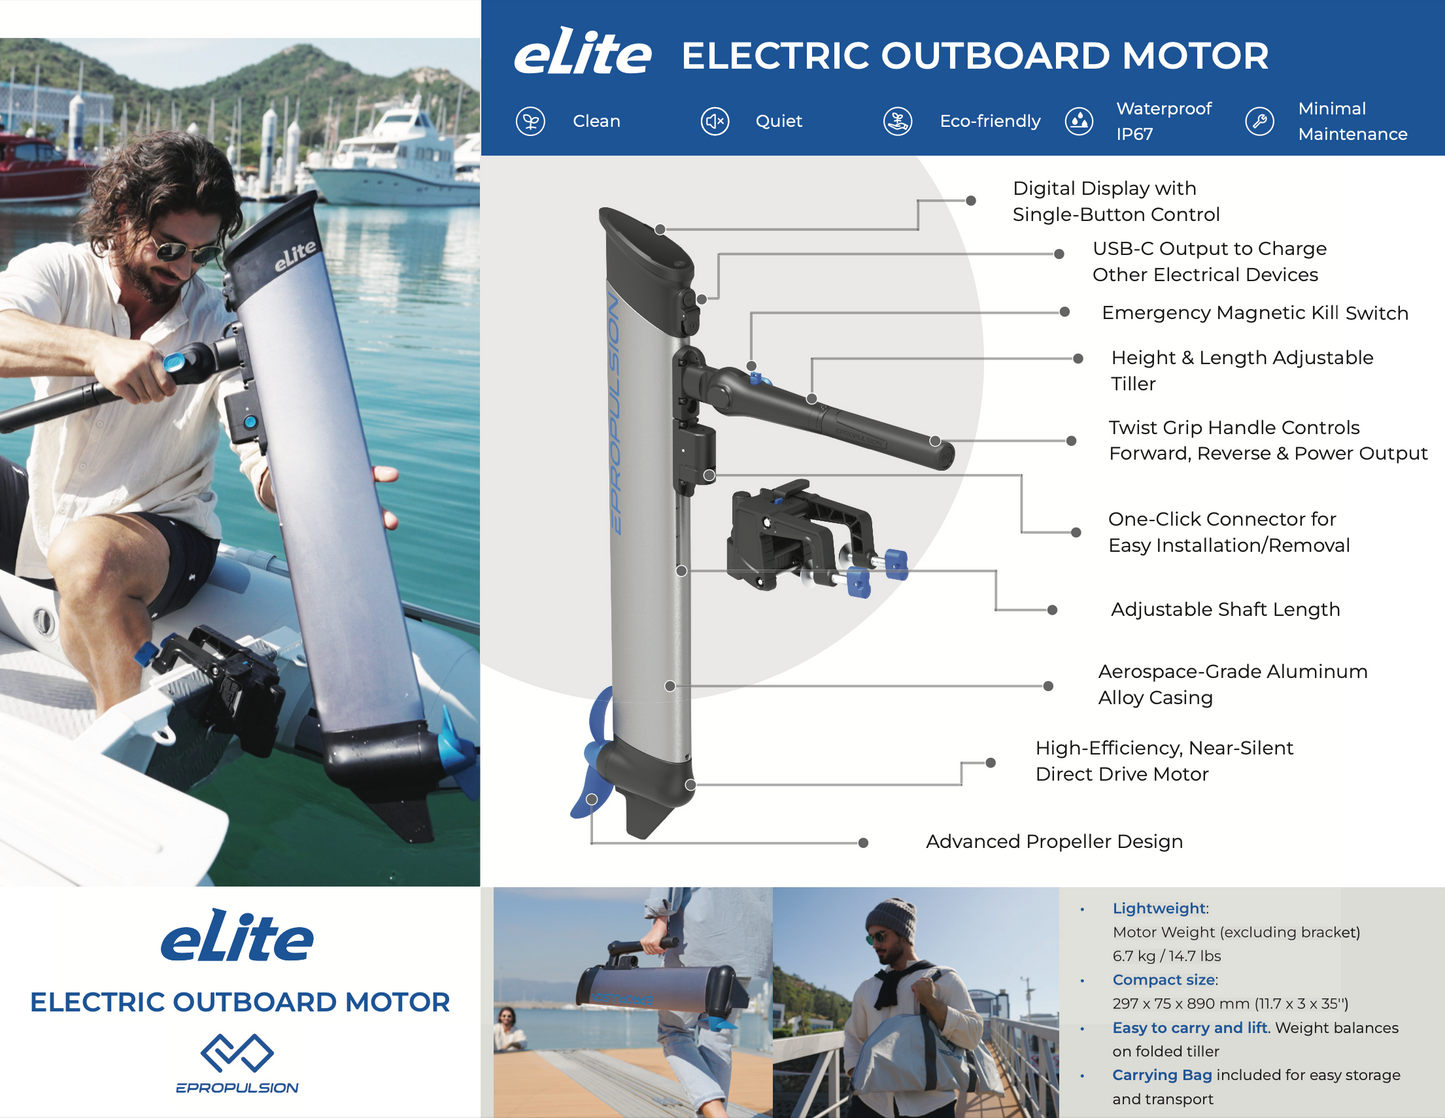 eLite Electric Outboard Motor